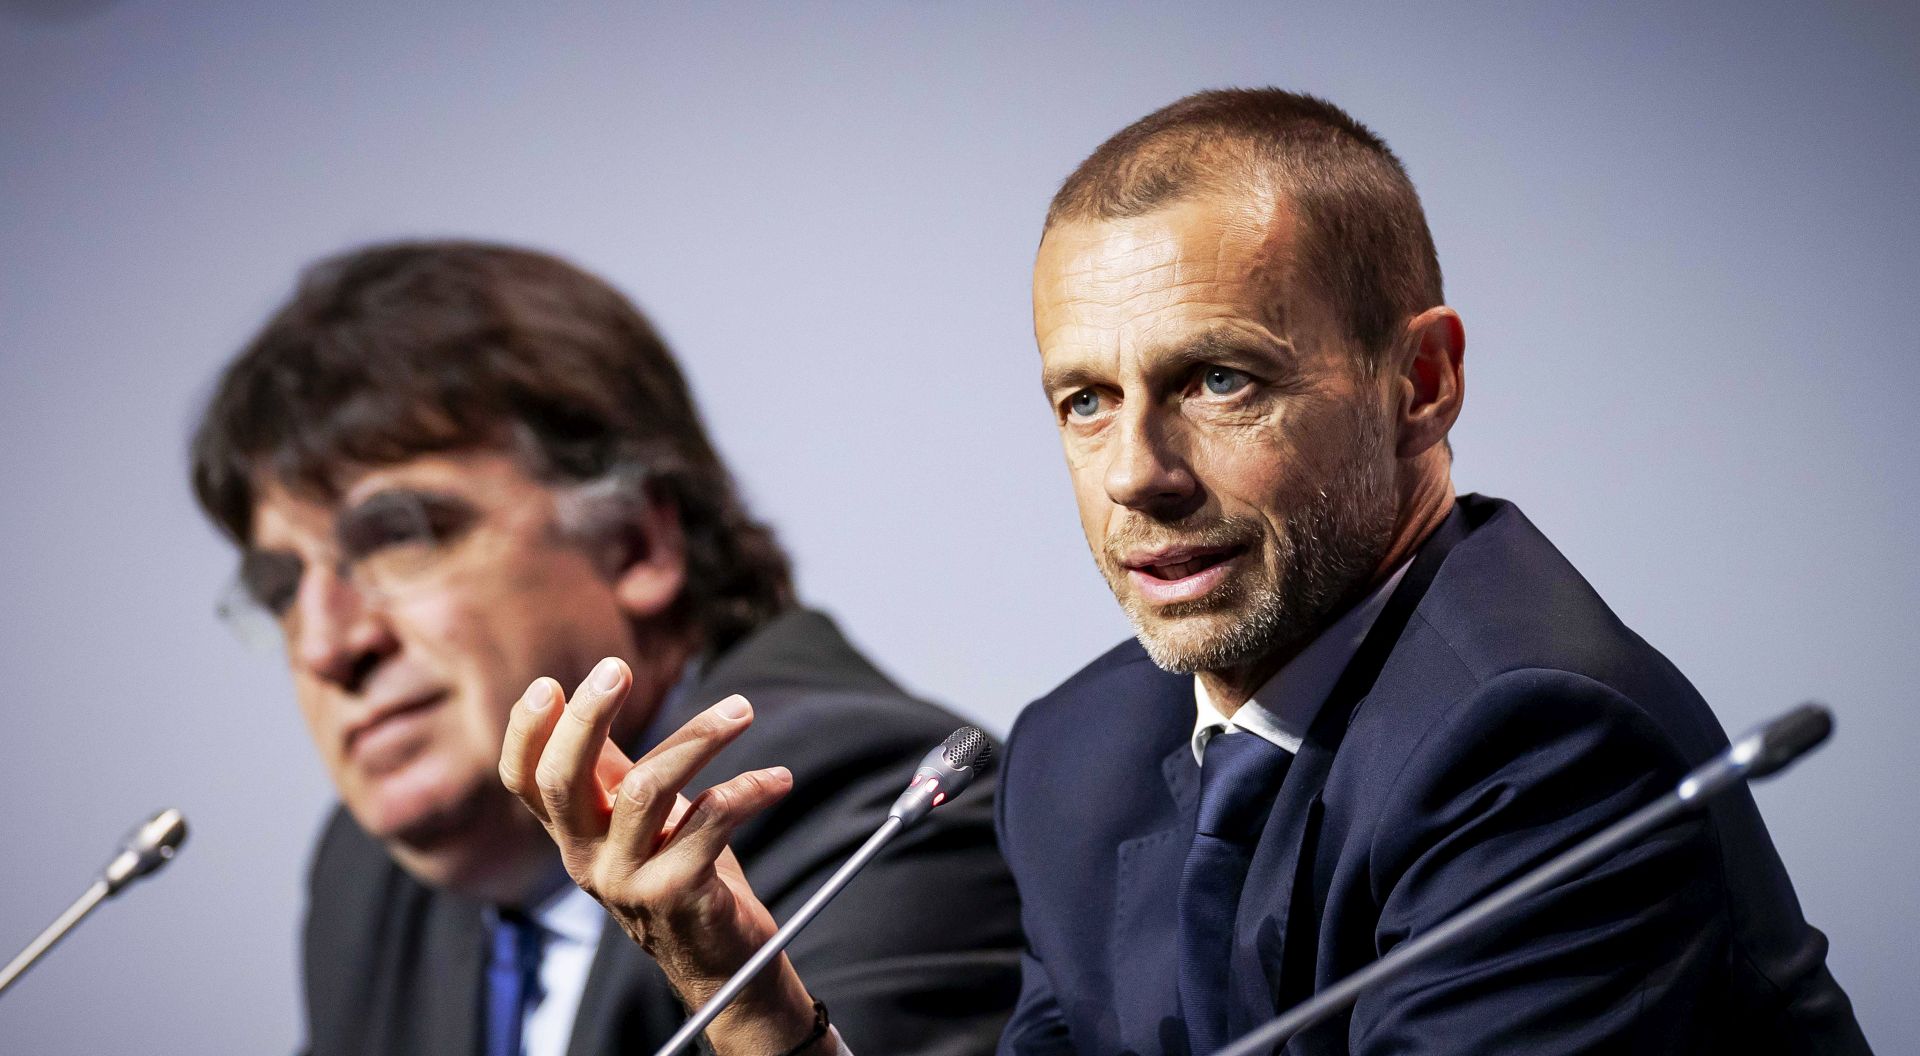 epa08266420 UEFA general secretary Theodore Theodoridis (L) and UEFA president Aleksander Ceferin (R) attend a press conference following the annual UEFA Congress meeting at the Beurs van Berlage building in Amsterdam, Netherlands, 03 March 2020.  EPA/ROBIN VAN LONKHUIJSEN